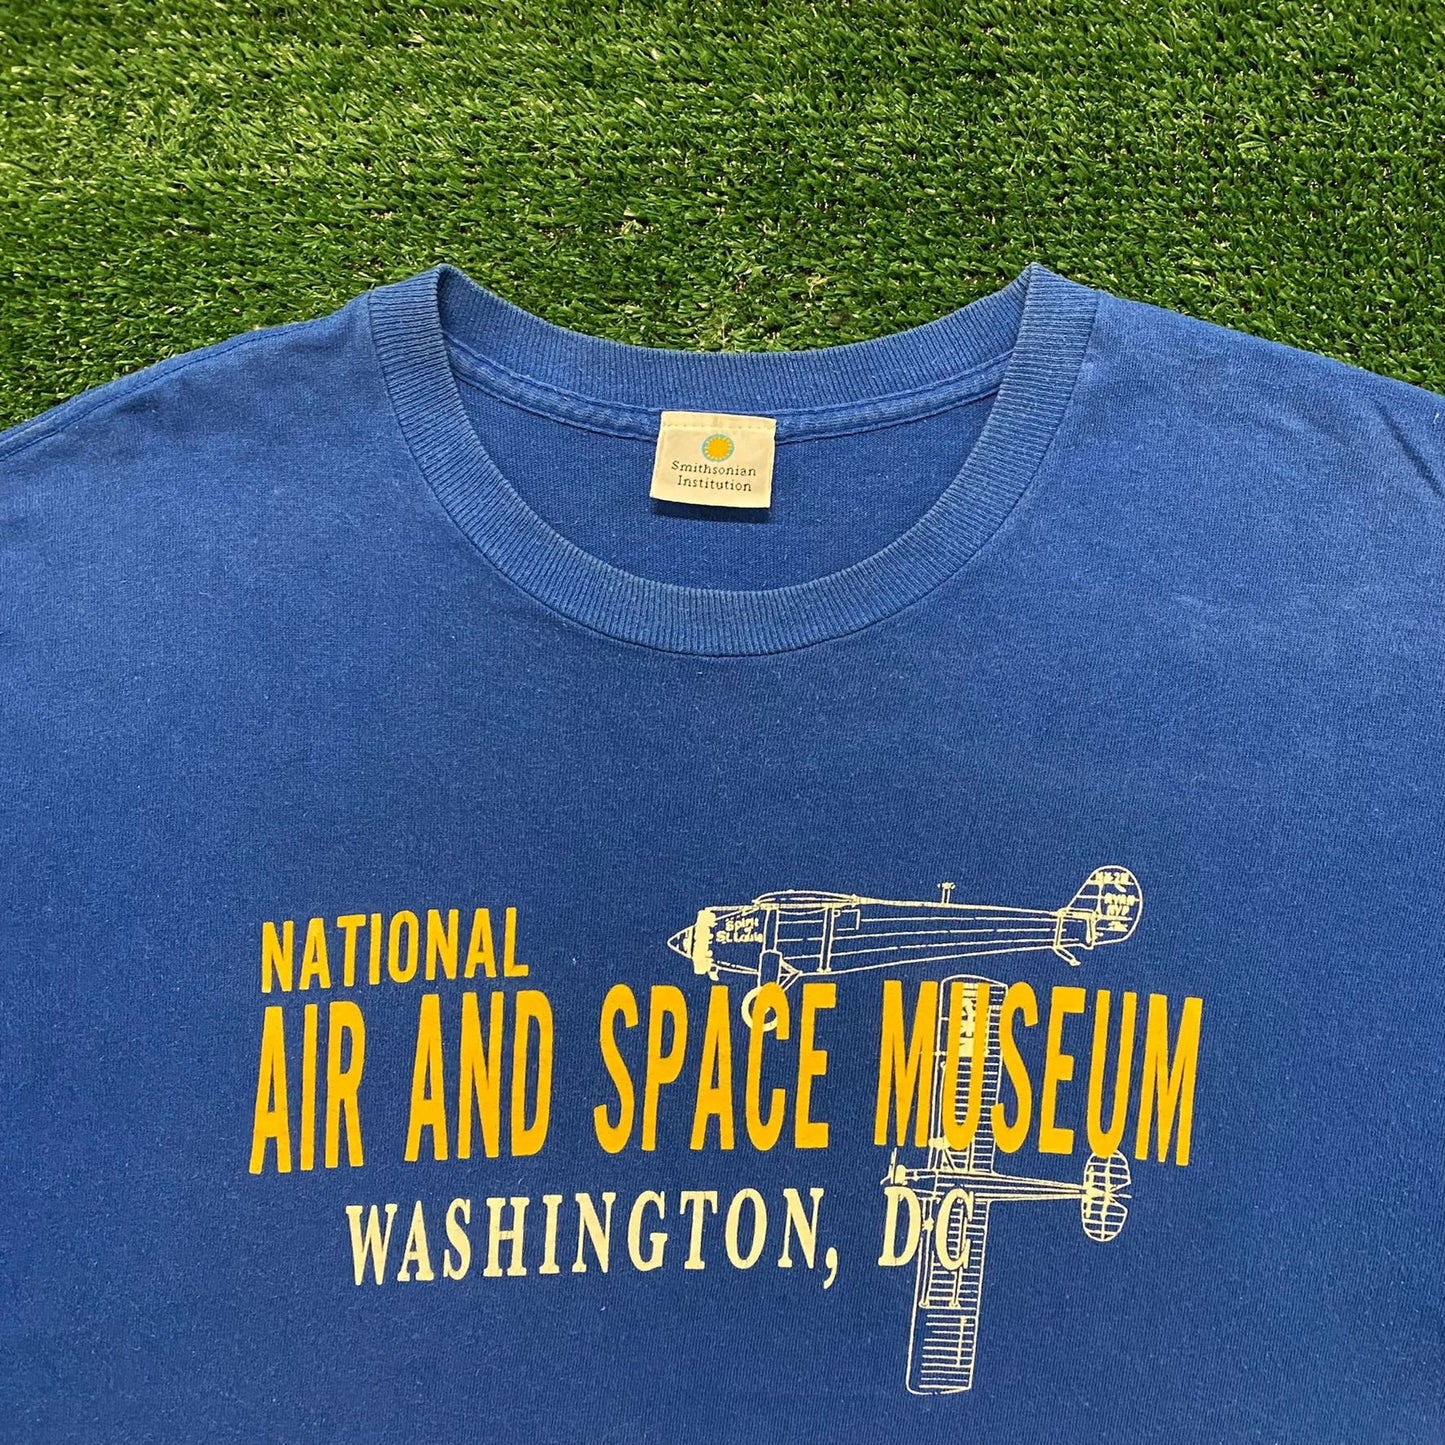 Smithsonian National Air and Space Museum Vintage T-Shirt